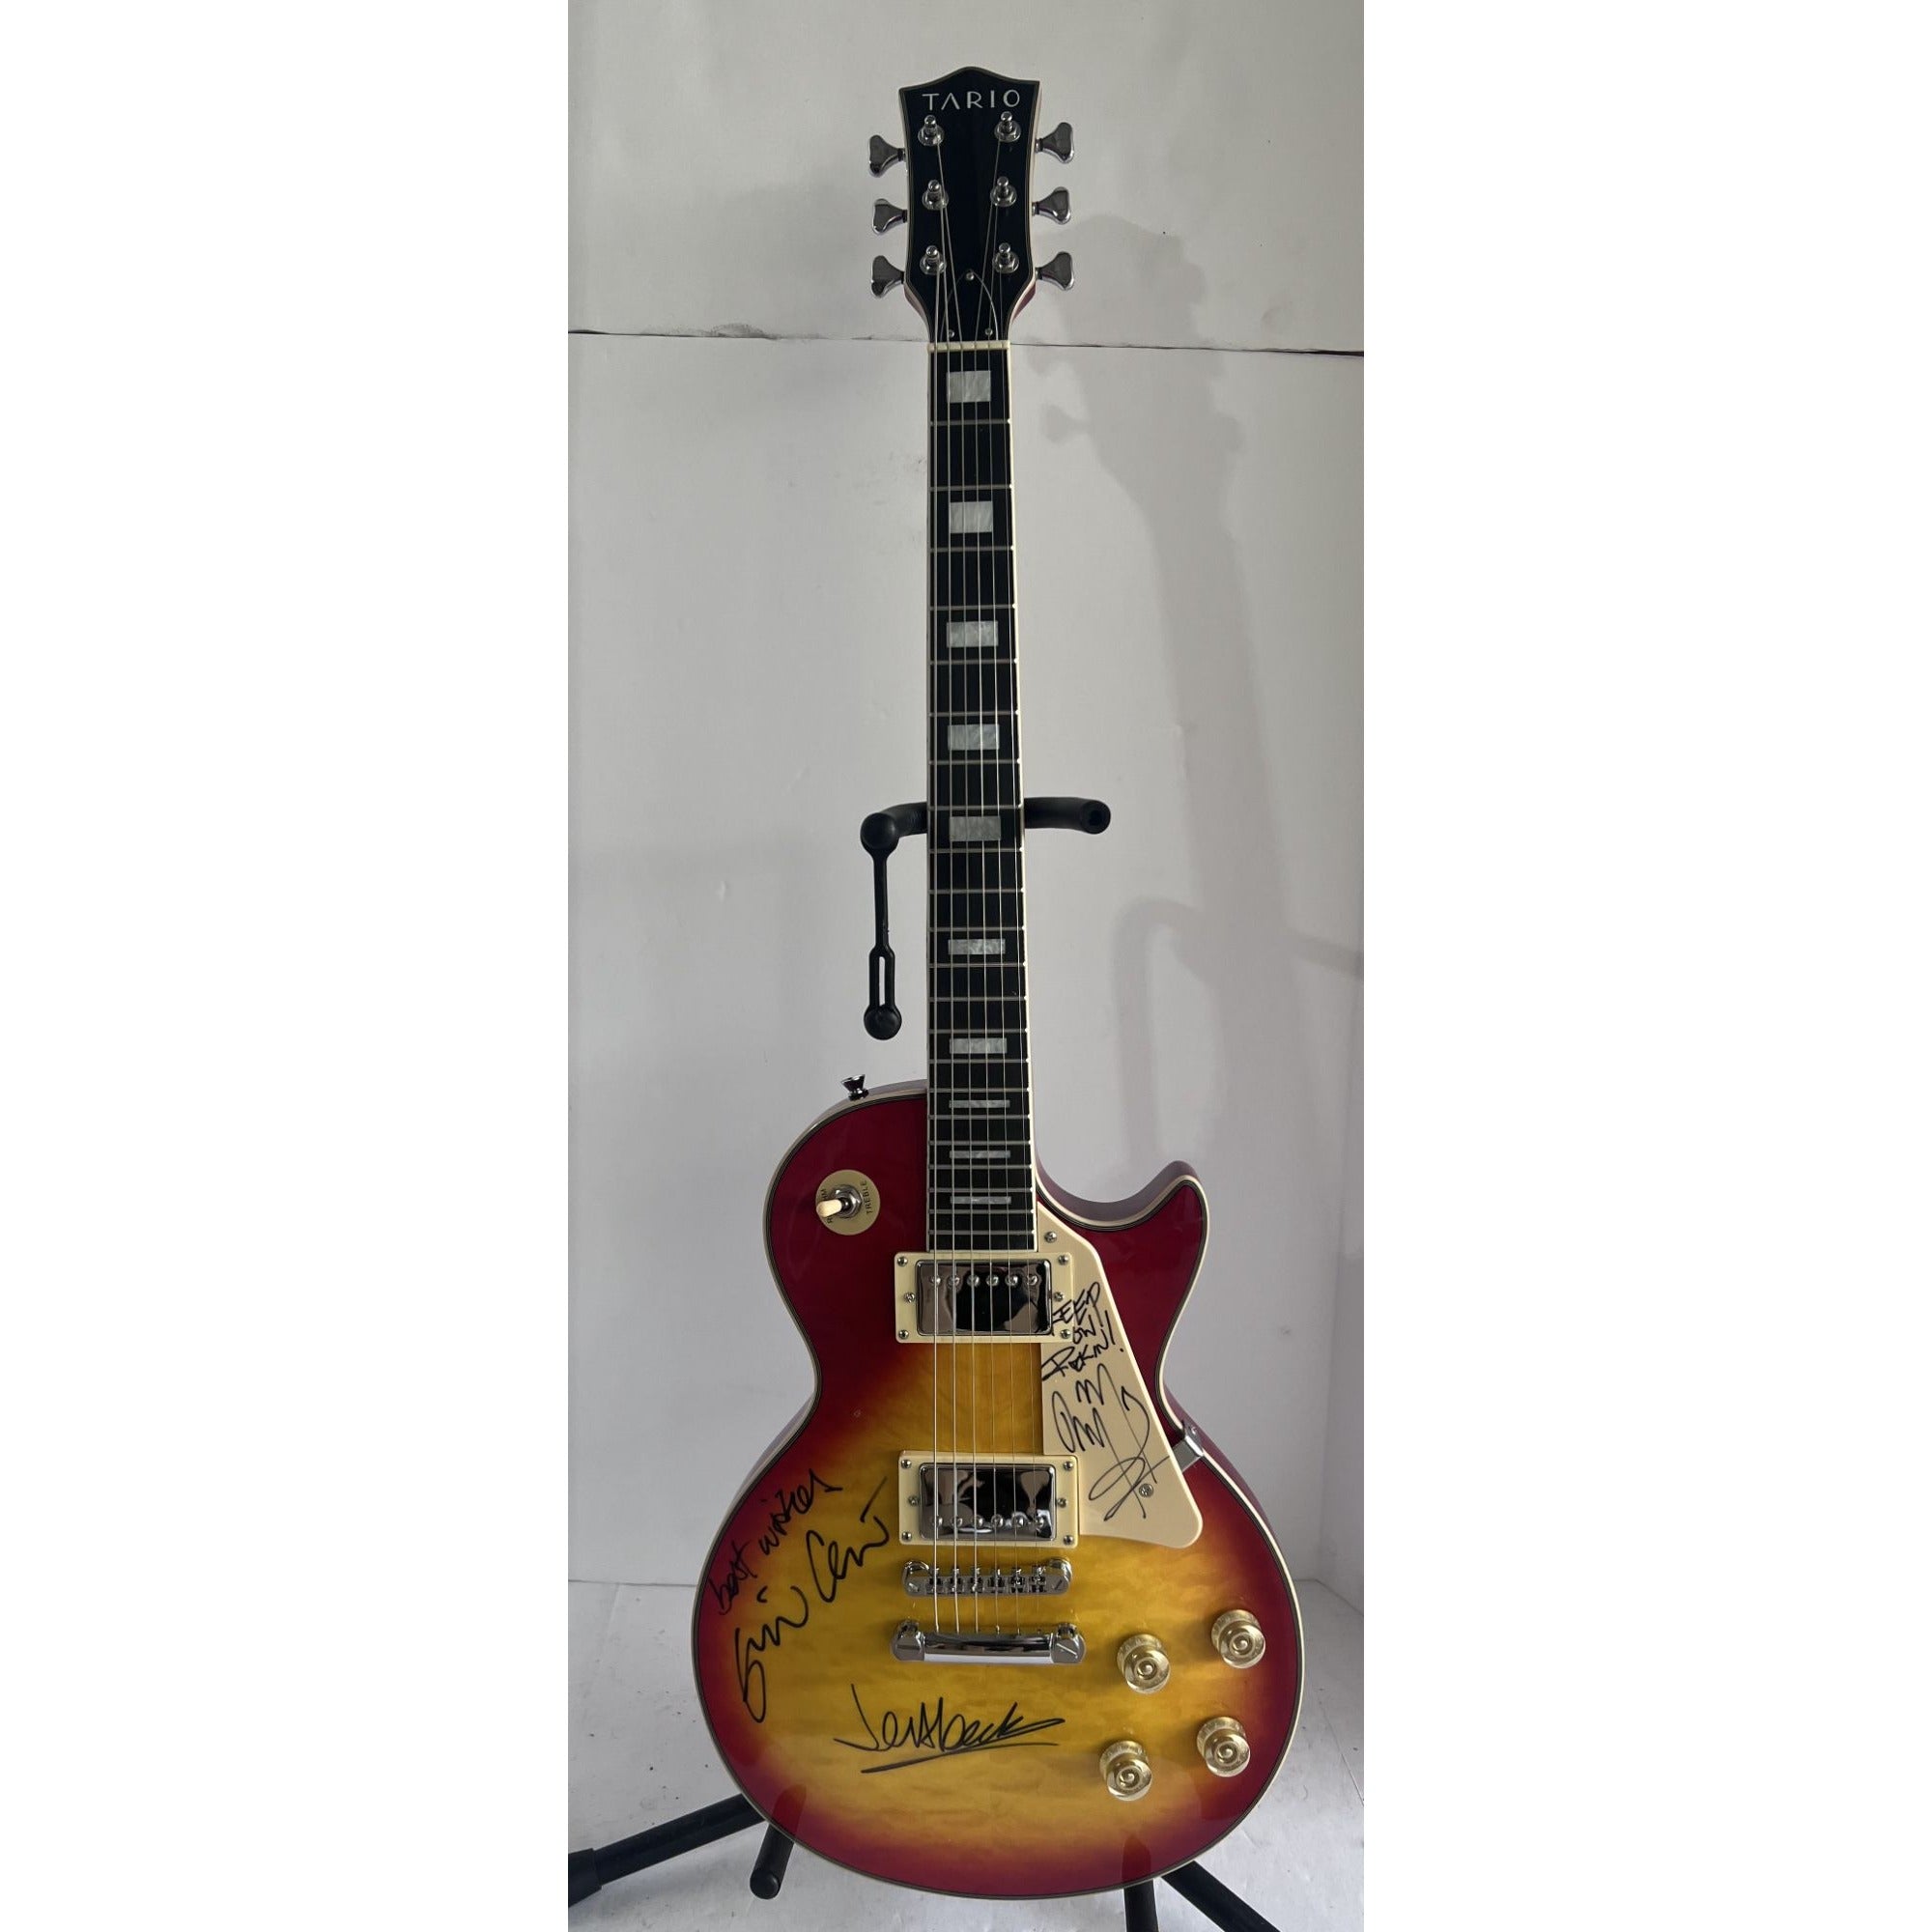 Jimmy Page Jeff Beck Eric Clapton incredible Les Paul electric guitar signed with proof